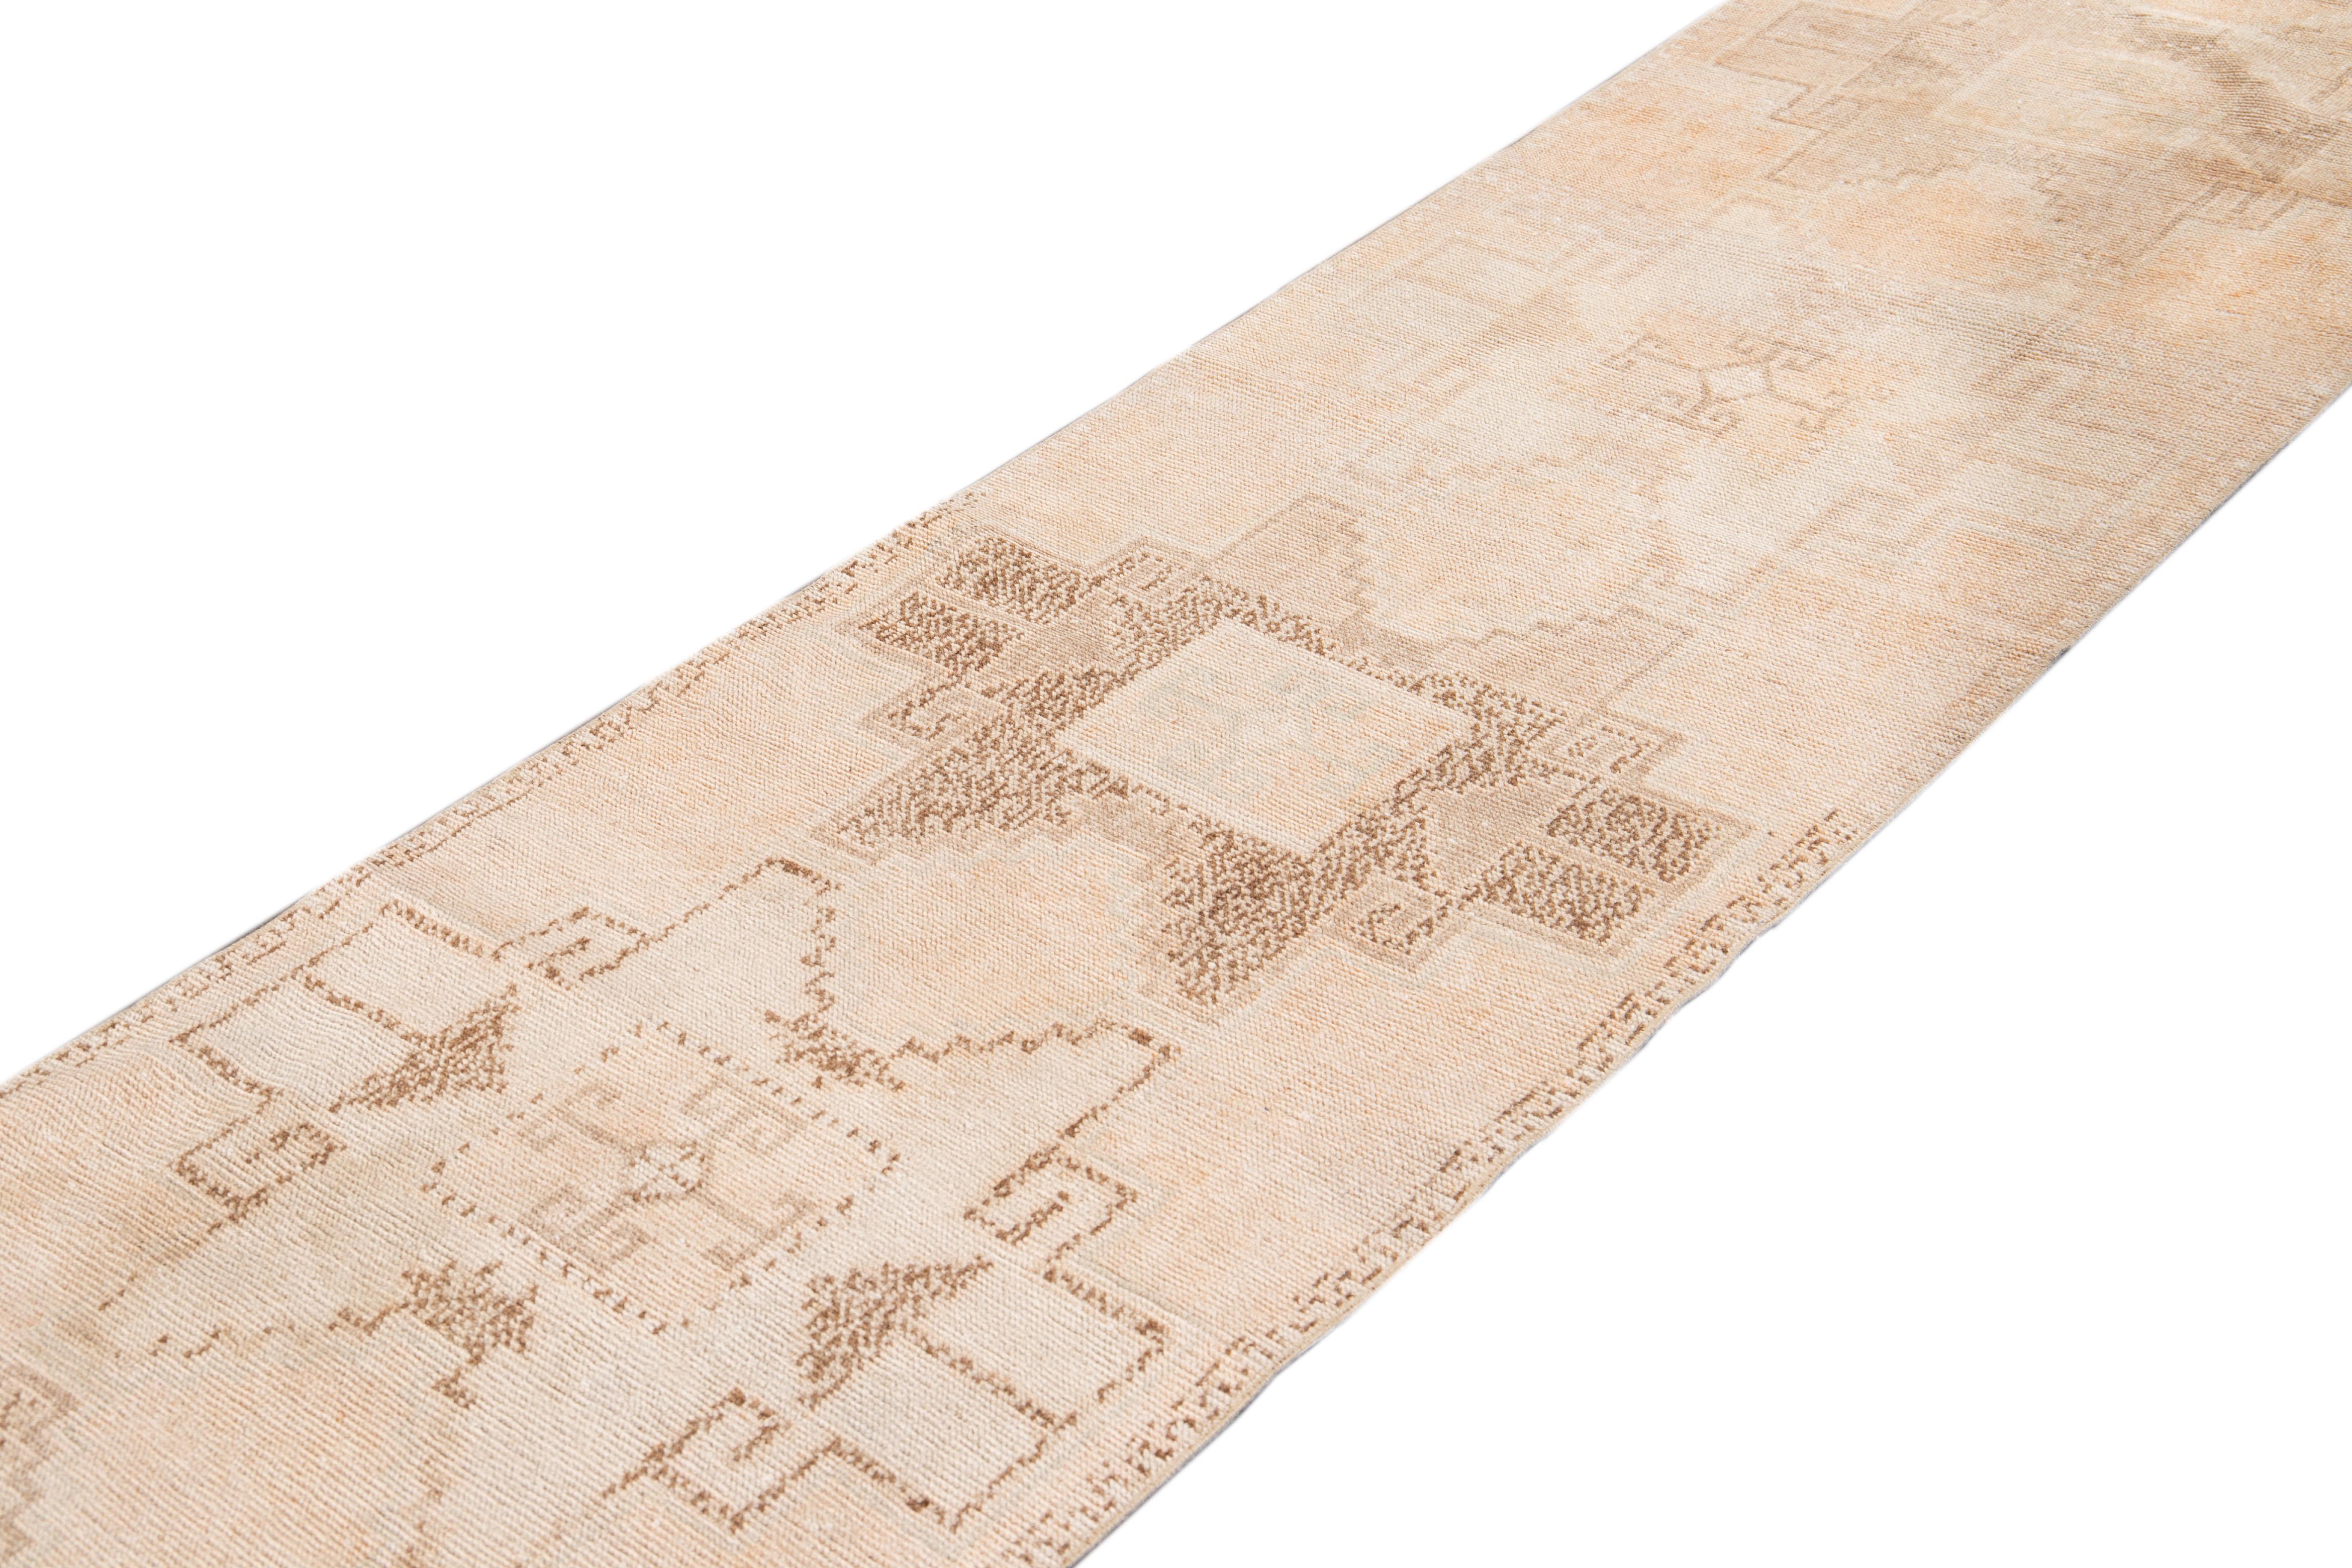 Beautiful antique runner rug, with a light blush field, brown and tan accents in an all-over multi medallion geometric design.

This rug measures 2' 9